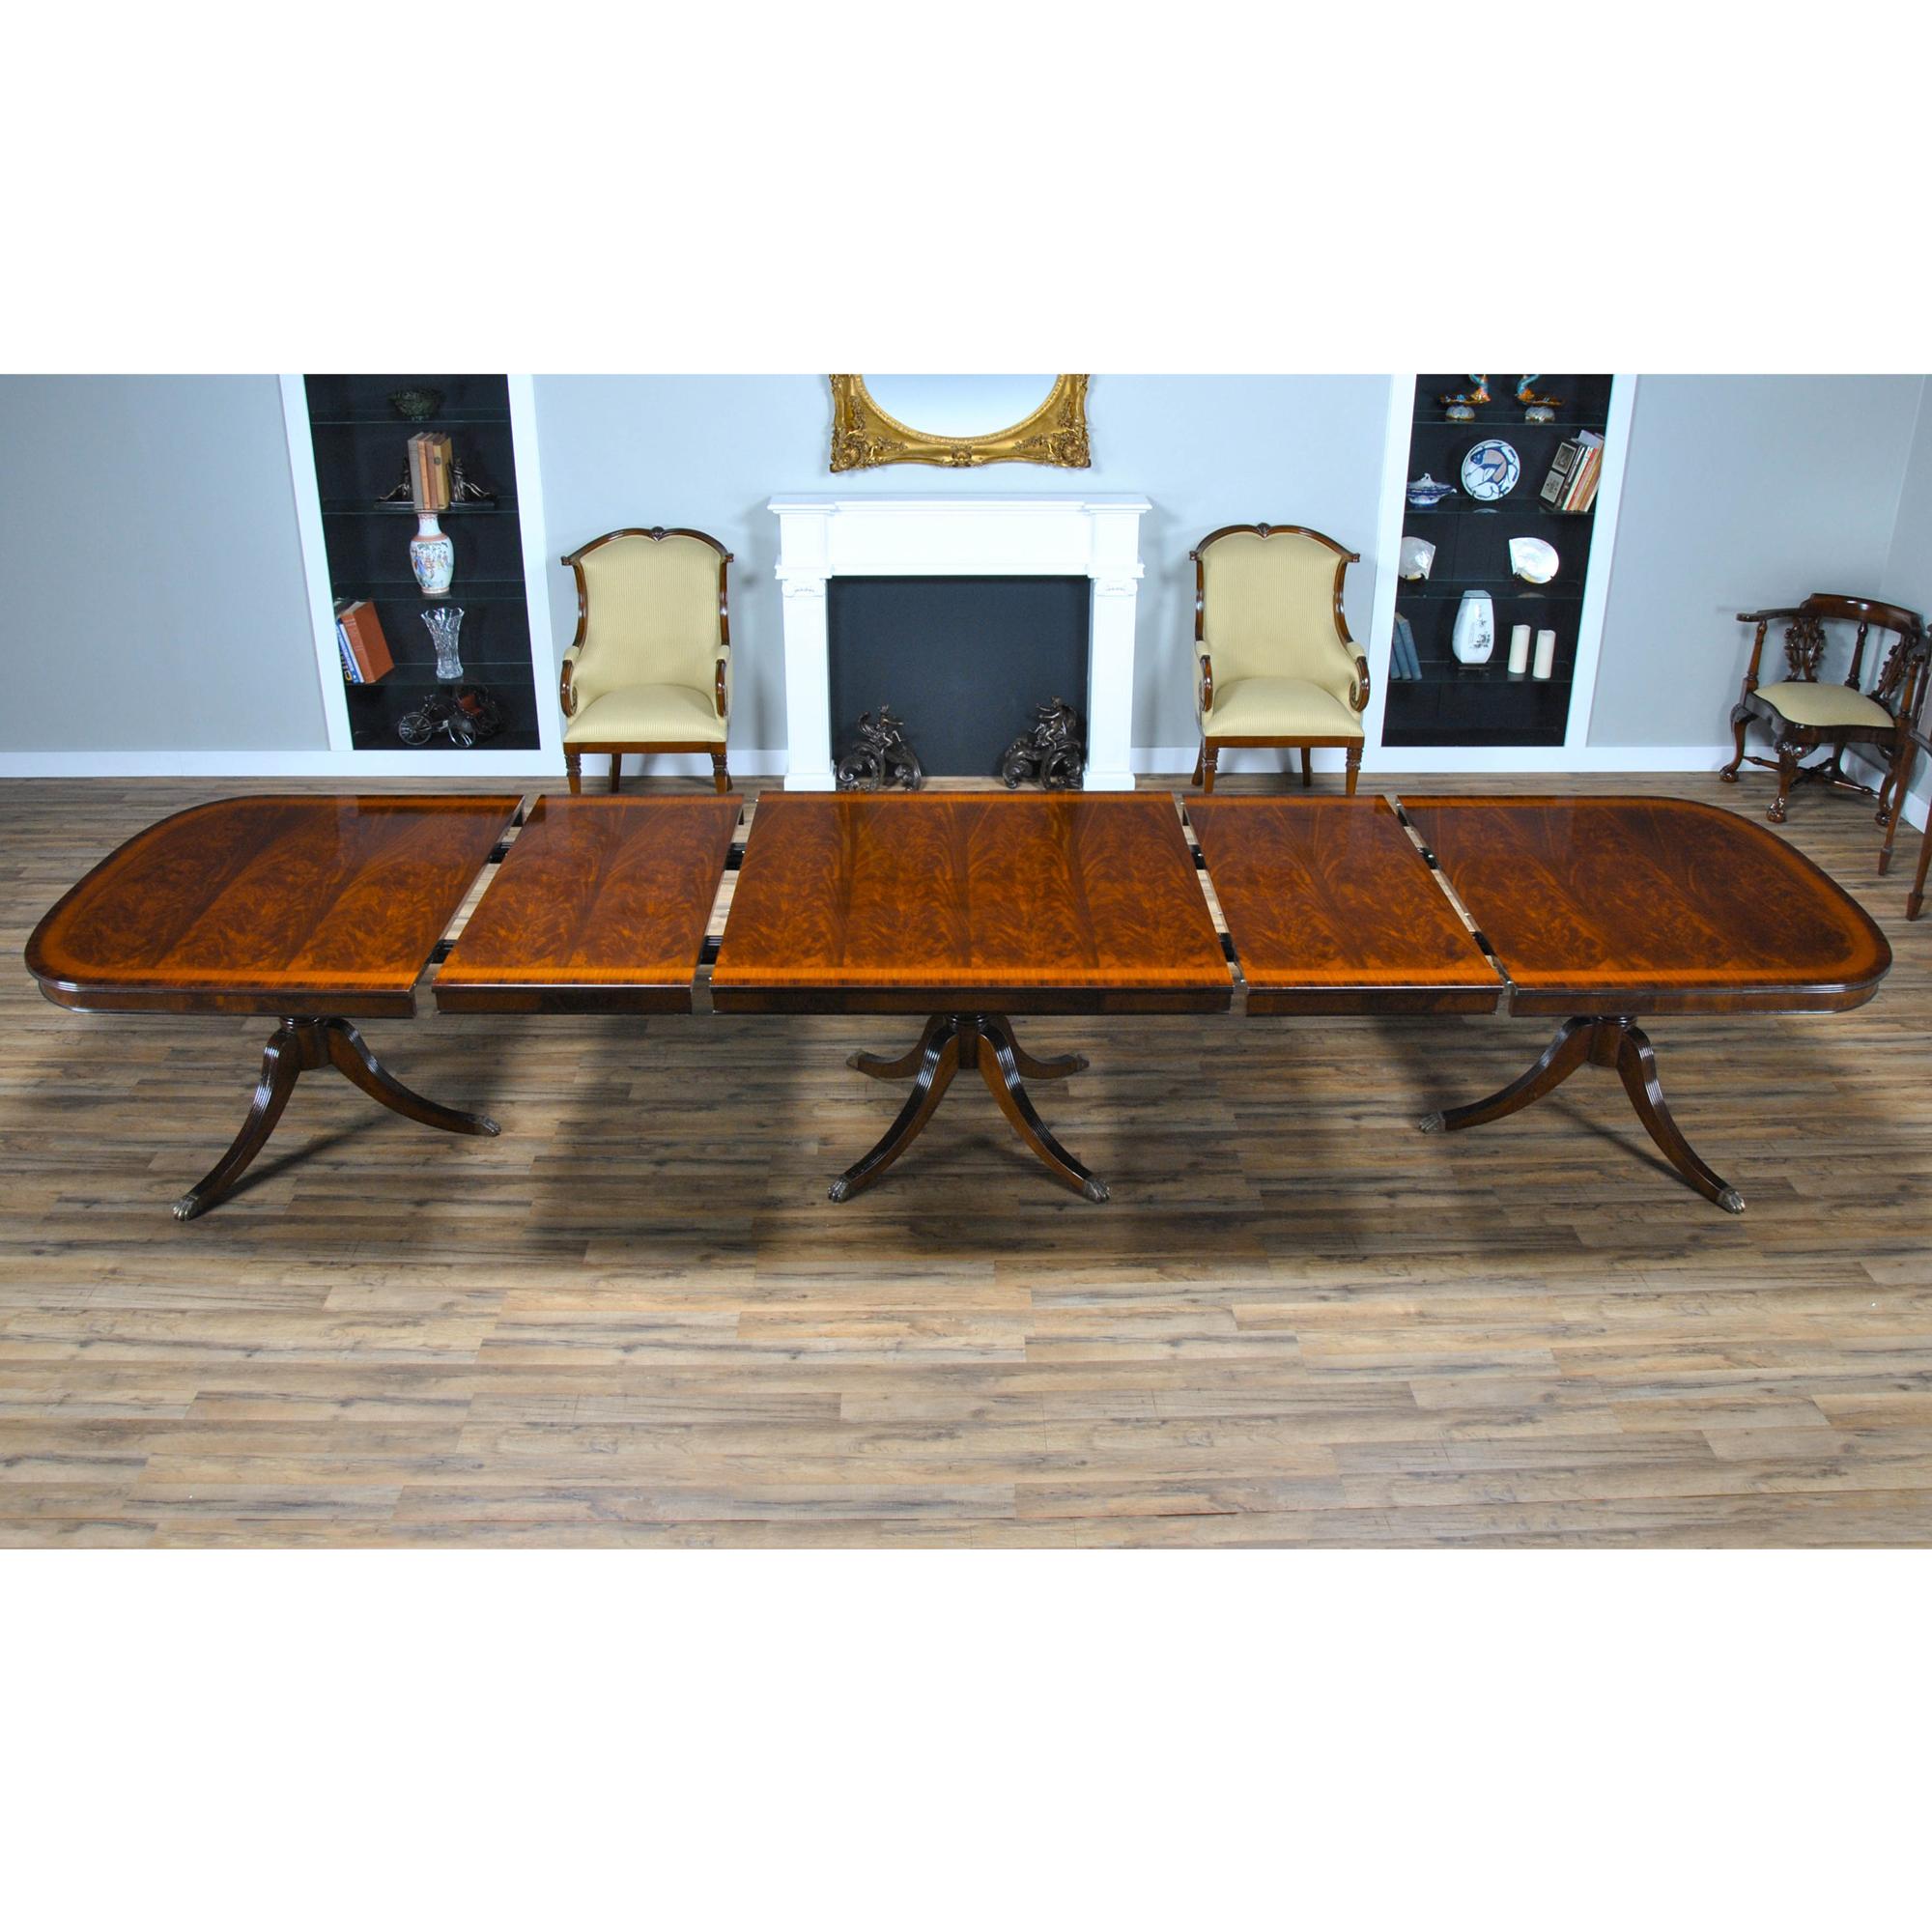 15 Foot Mahogany Dining Table In New Condition For Sale In Annville, PA